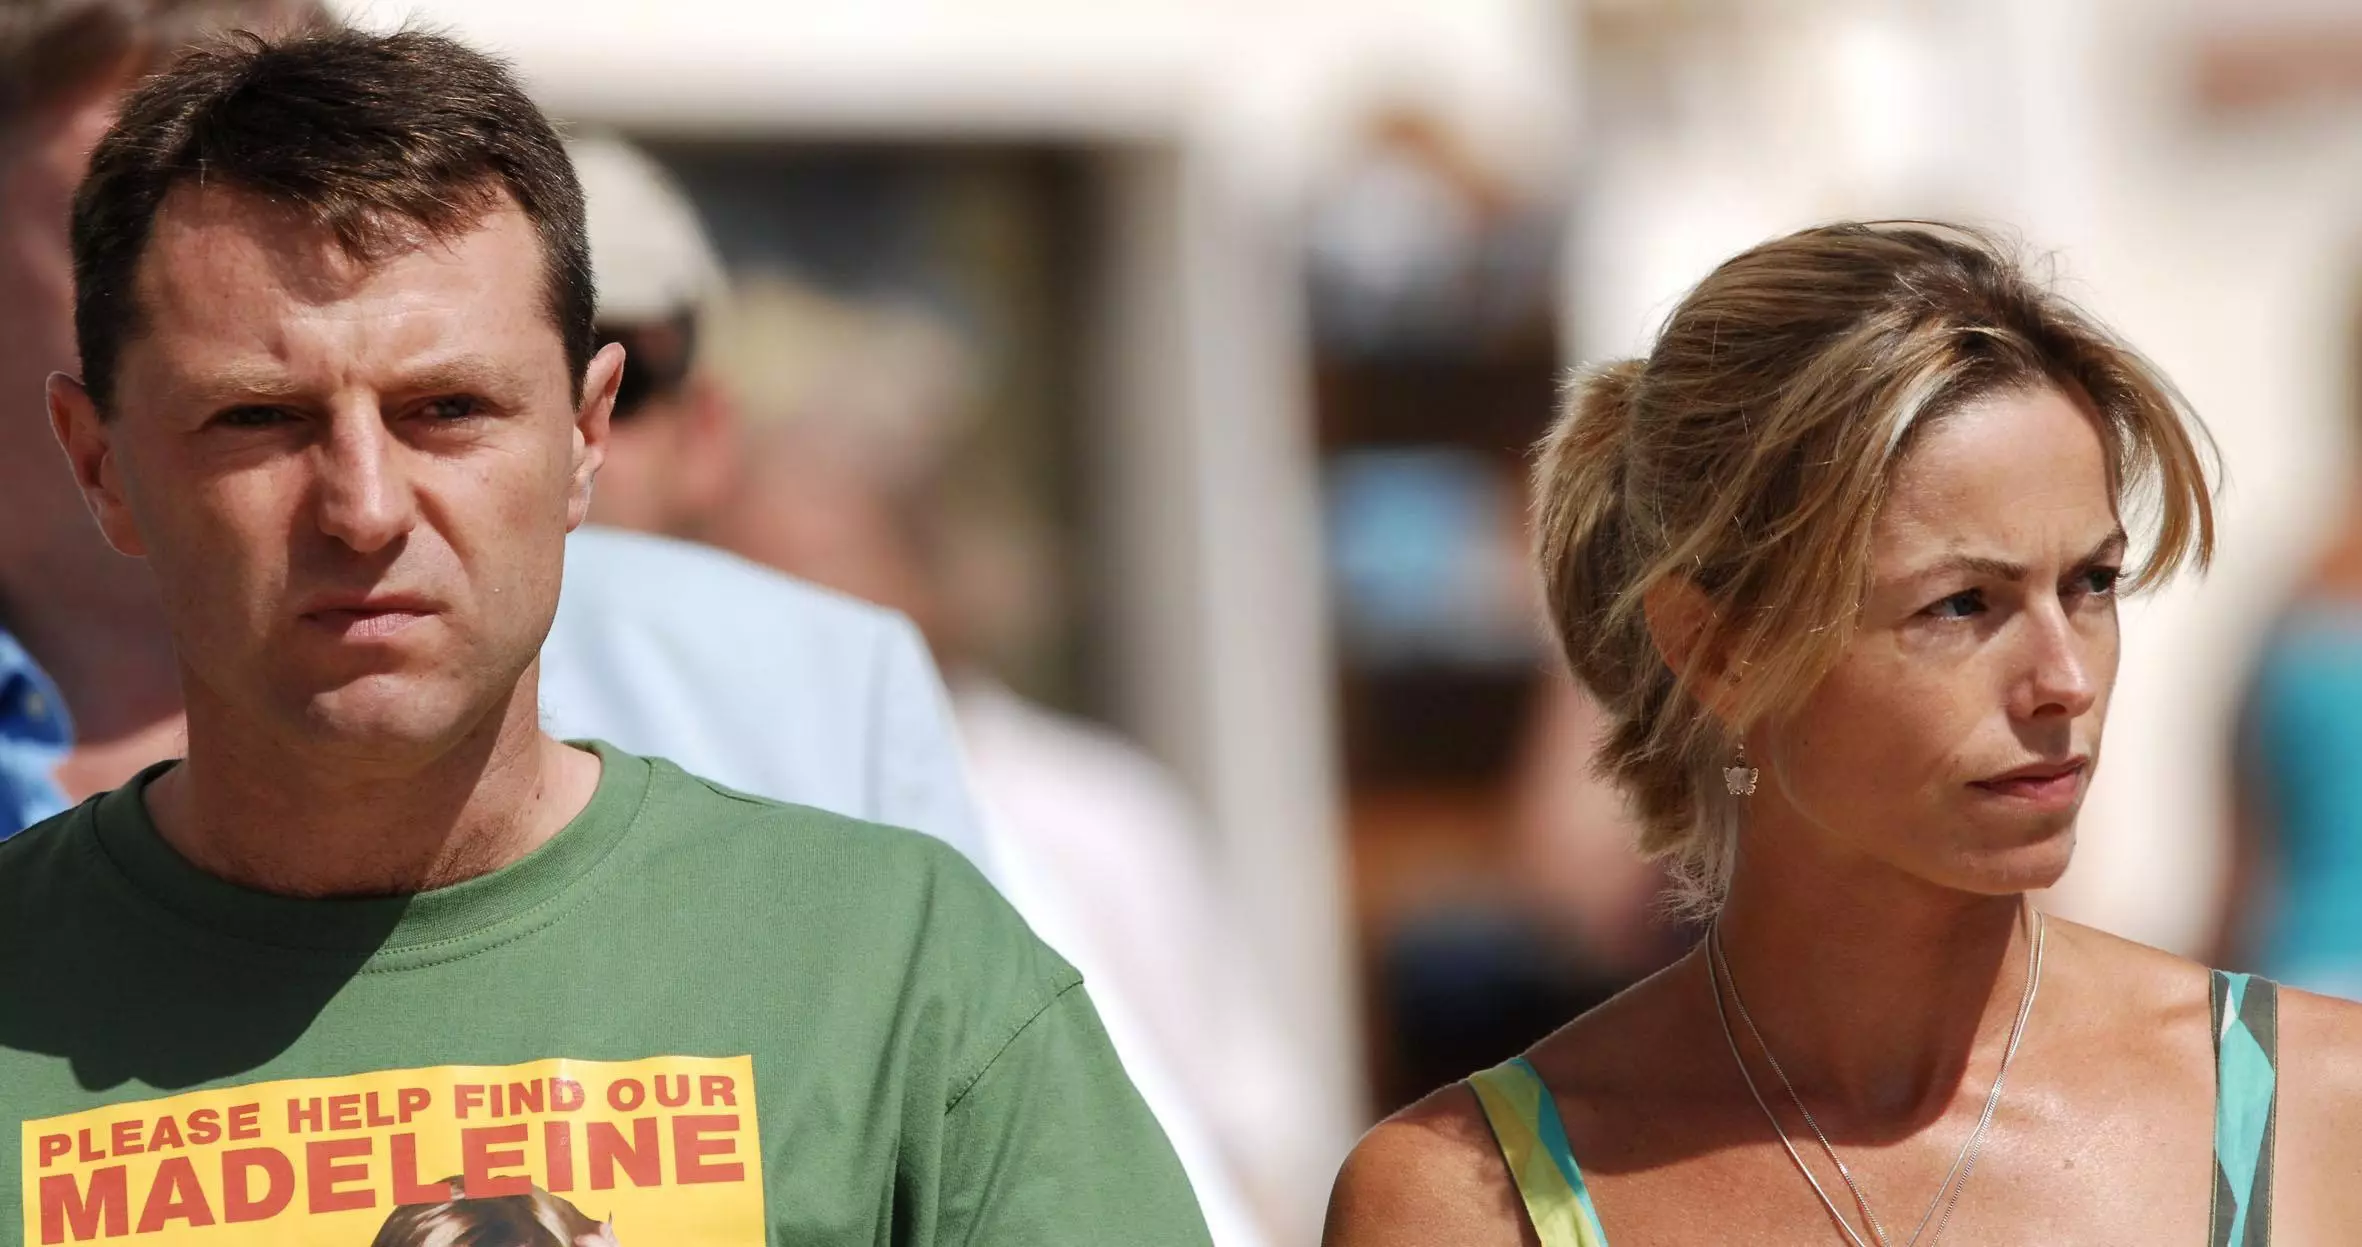 Madeleine's parents Kate and Gerry McCann (pictured) believe their daughter is still alive.